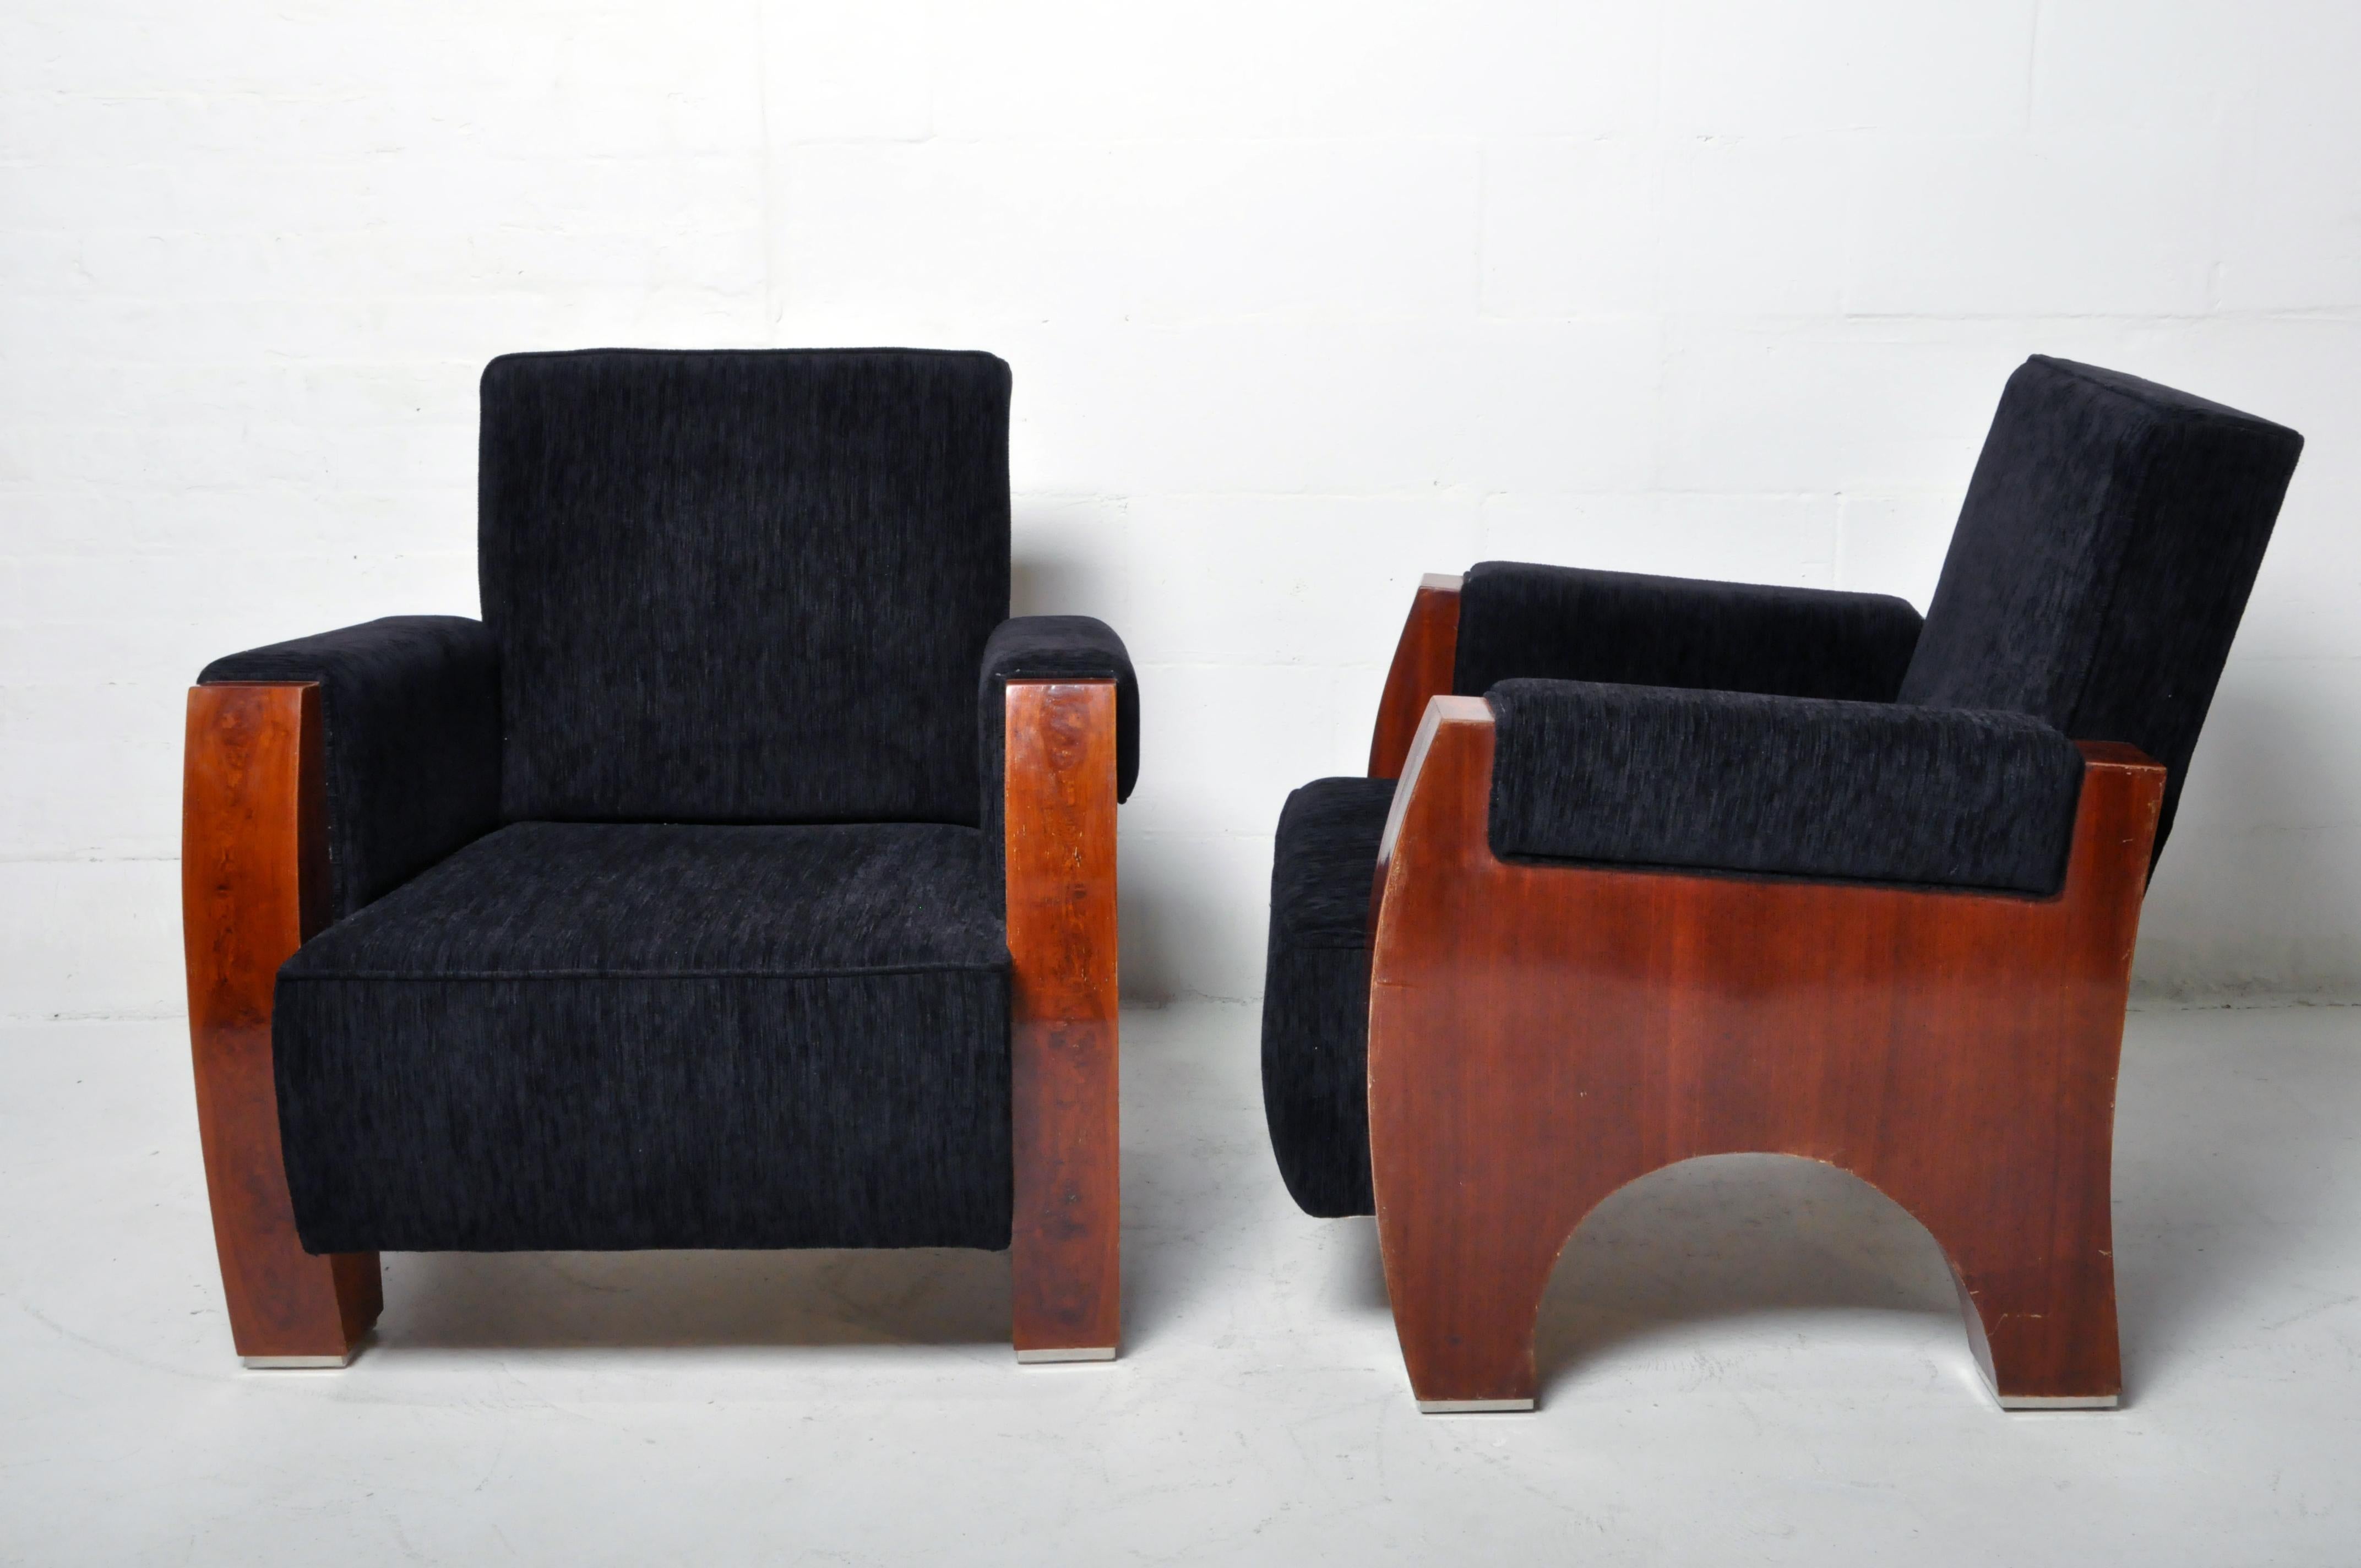 Pair of Art Deco Style Club Chairs with Wooden Arms For Sale at 1stDibs